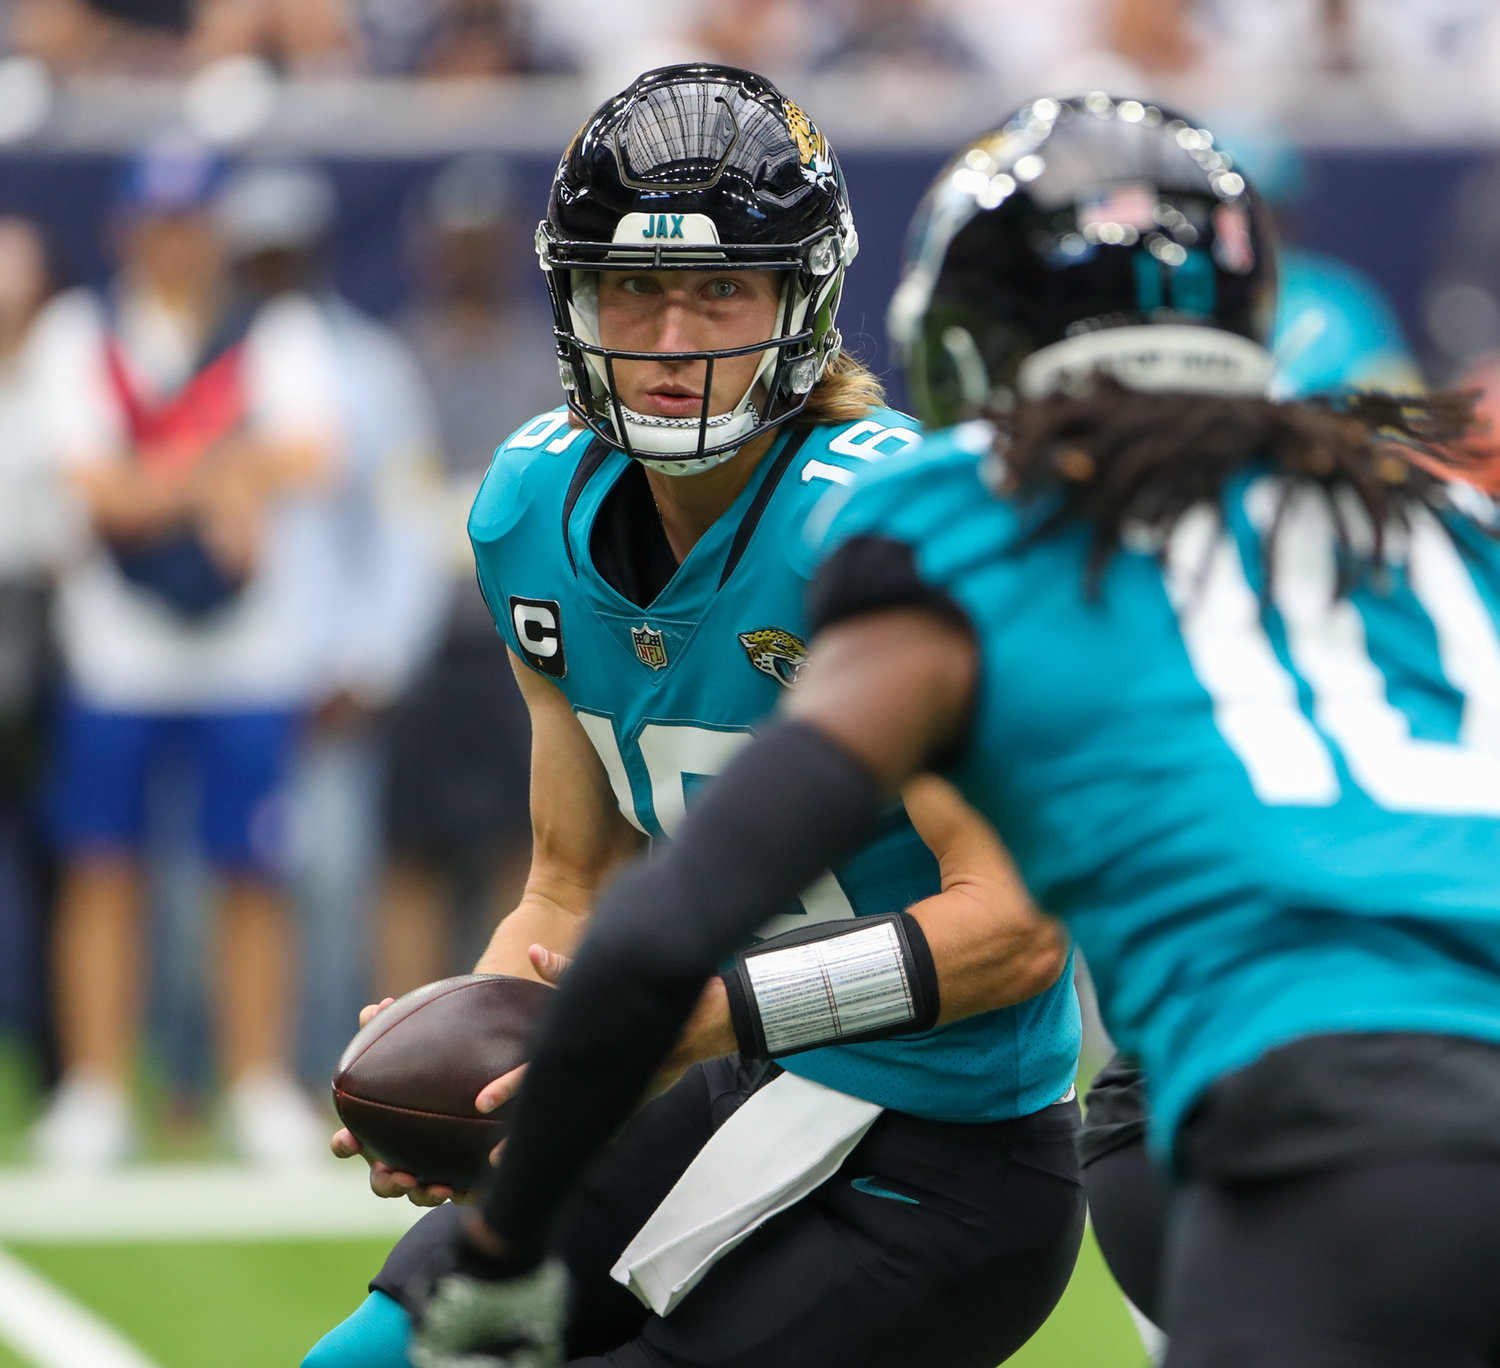 Jacksonville Jaguars quarterback Trevor Lawrence (16) prepares to hand the ball to wide receiver Laviska Shenault Jr. (10) on a reverse during the first half of an NFL game between the Houston Texans and the Jacksonville Jaguars on September 12, 2021 in Houston, Texas.